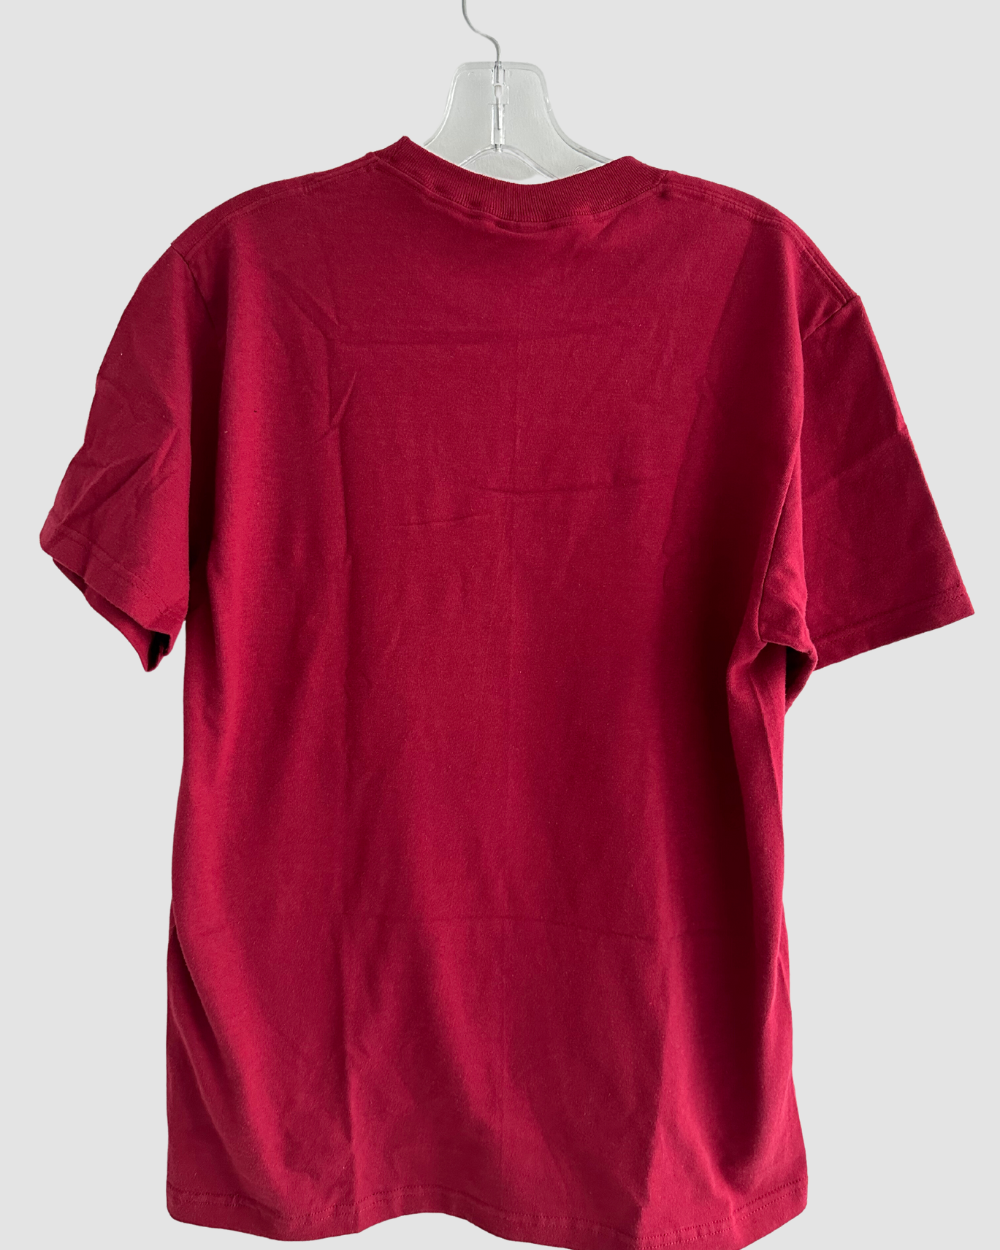 Supreme Red Graphic T-Shirt